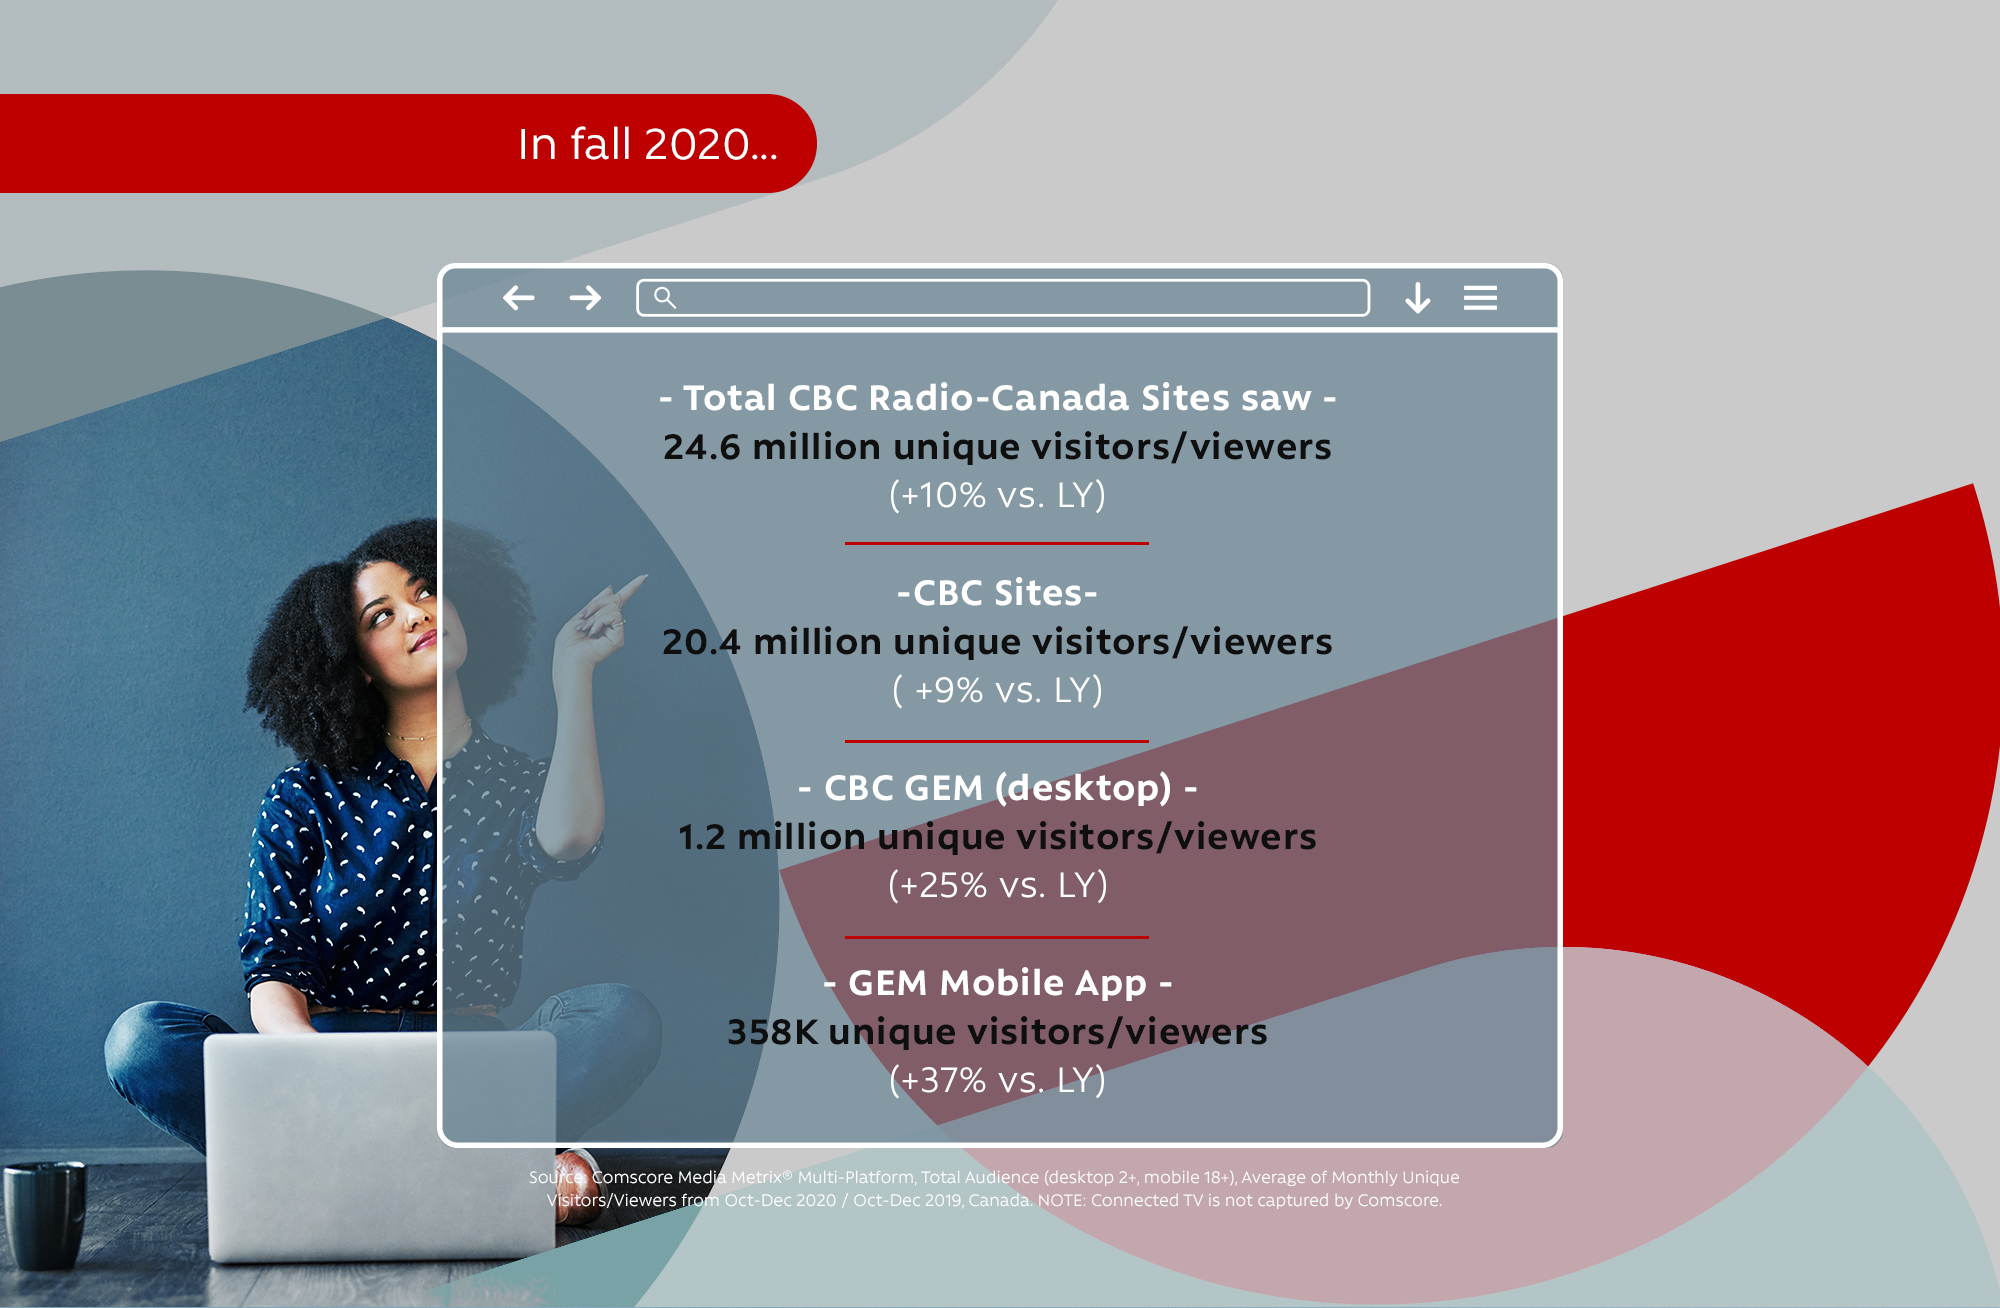 In fall 2020 - Total CBC Radio-Canada Sites saw -
24.6 million unique visitors/viewers (+10% vs. LY) -CBC Sites- 20.4 million unique visitors/viewers ( +9% vs. LY) - CBC GEM (desktop) - 1.2 million unique visitors/viewers (+25% vs. LY) - GEM Mobile App - 358K unique visitors/viewers (+37% vs. LY)